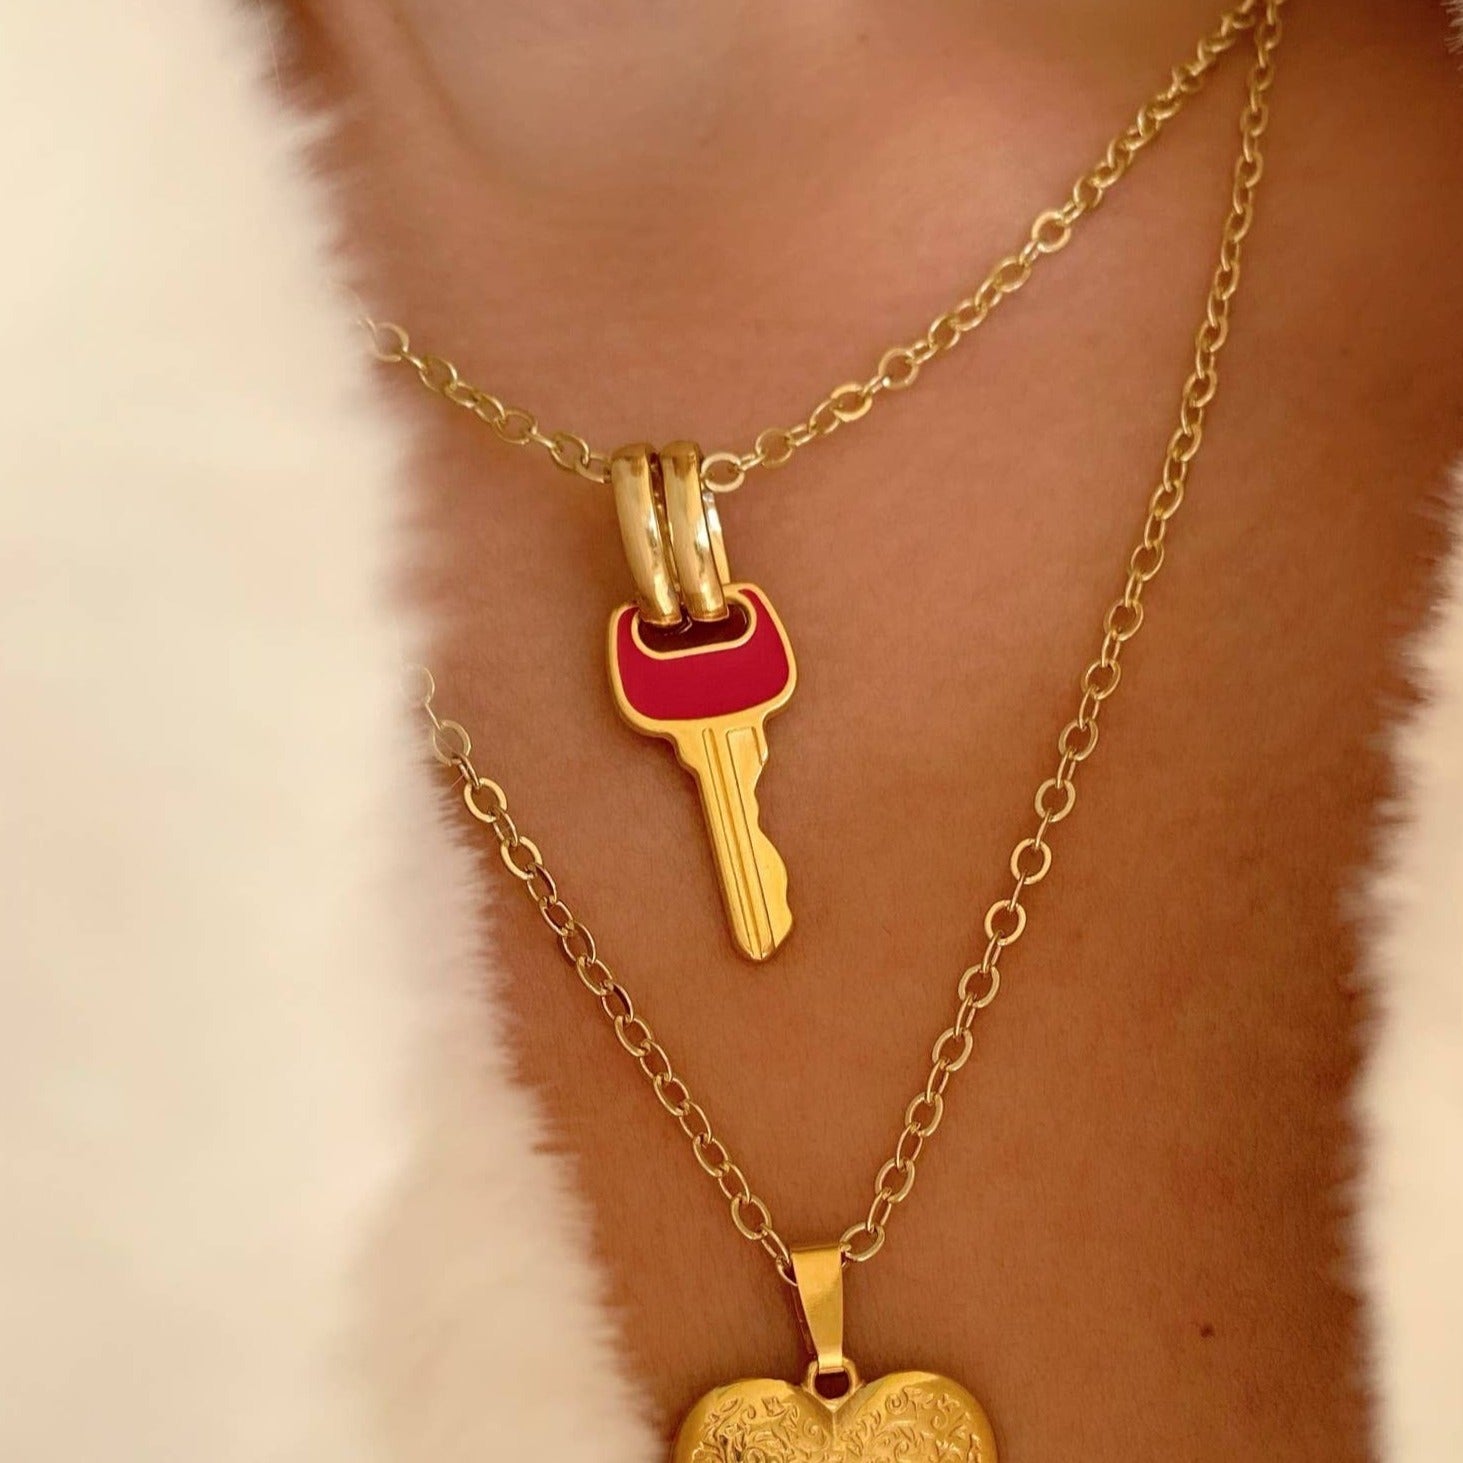 Romantic Red and Gold Key Necklace | Handmade in Athens, Greece